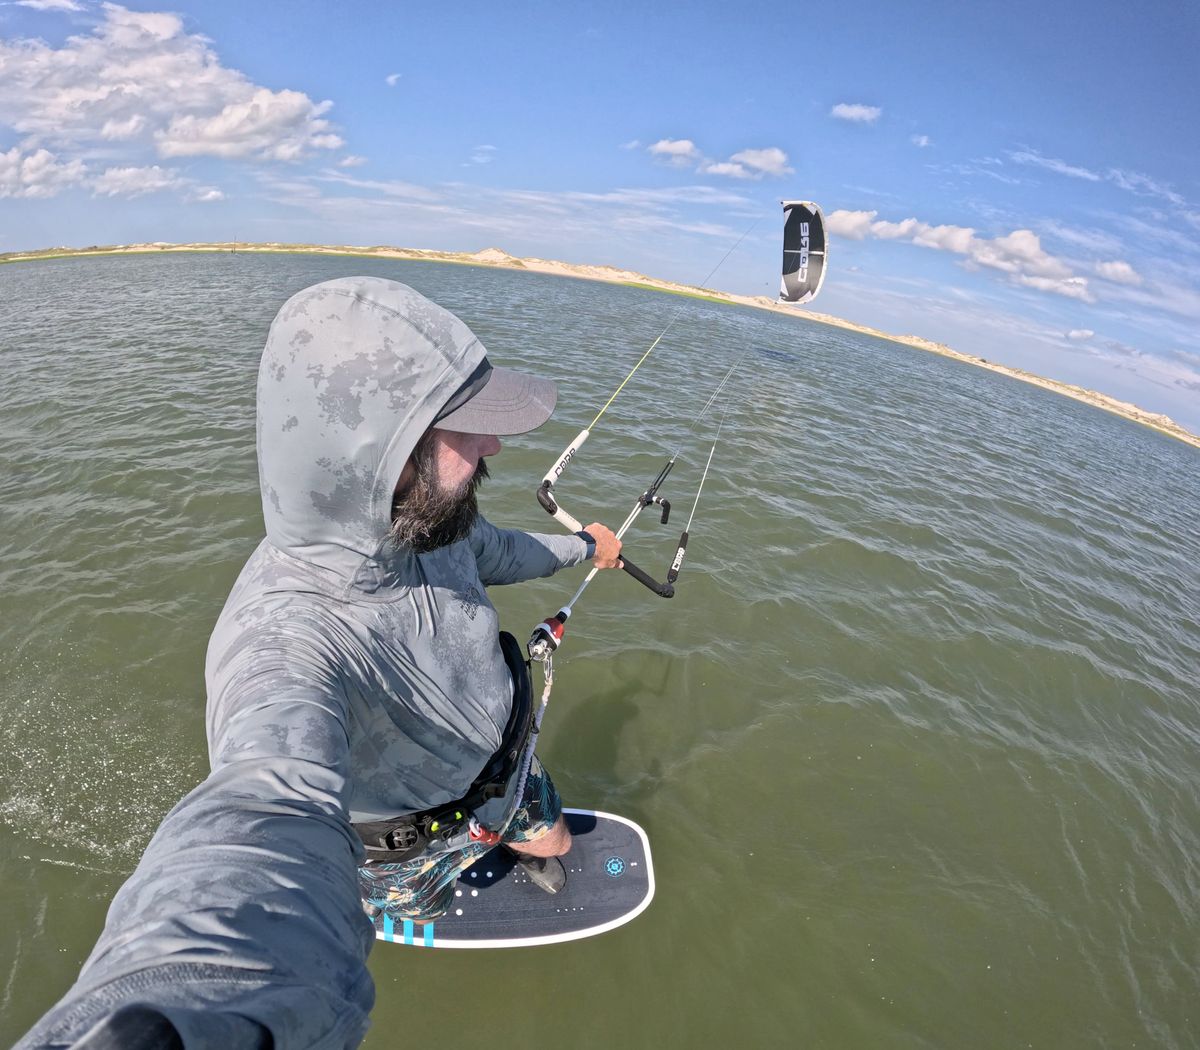 Learn to kite foil in under 20 hours